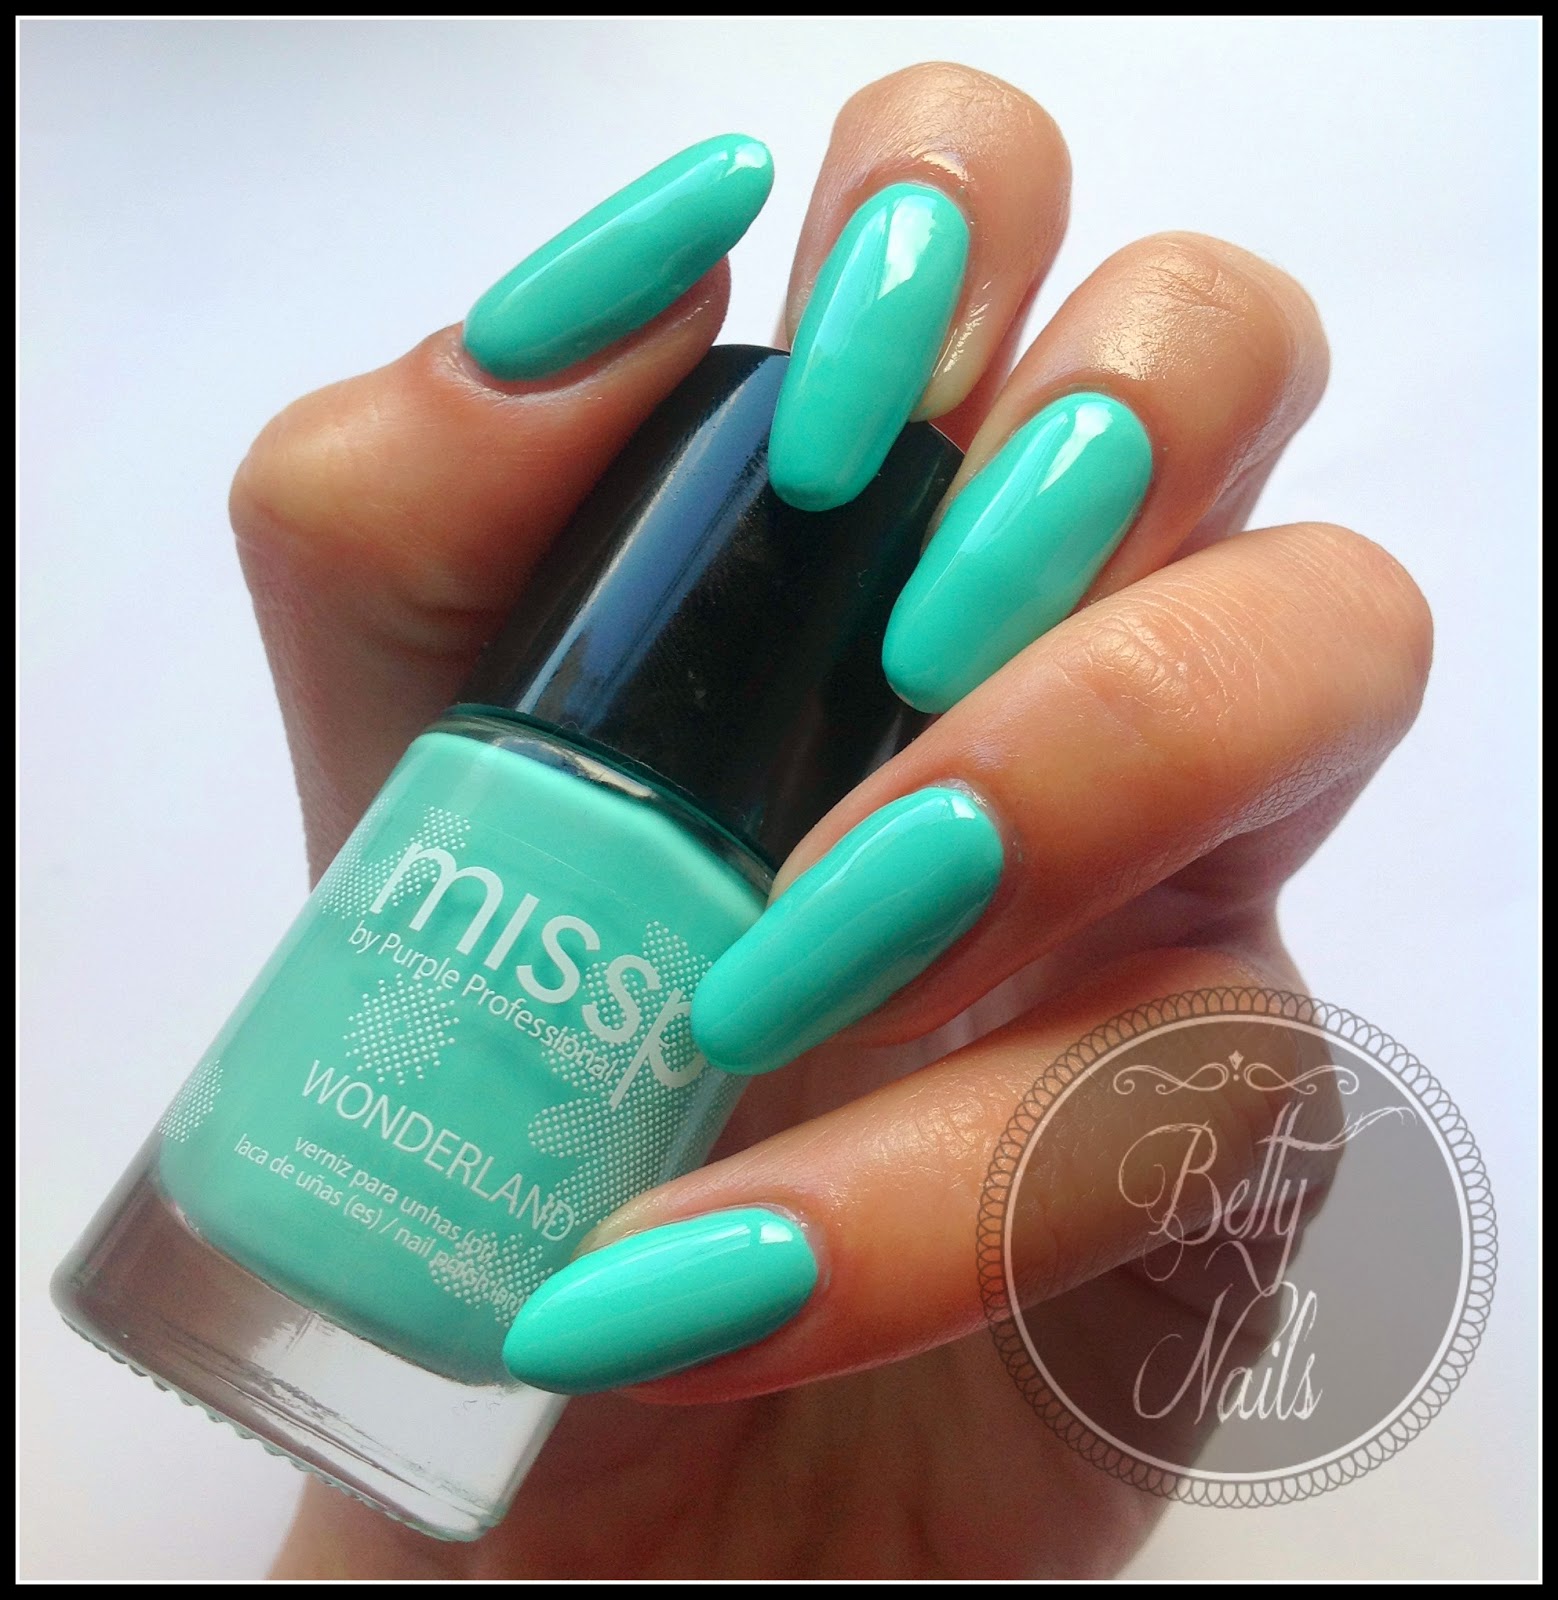 Betty Nails: missp - Swatches - Green Shades 1 to 5